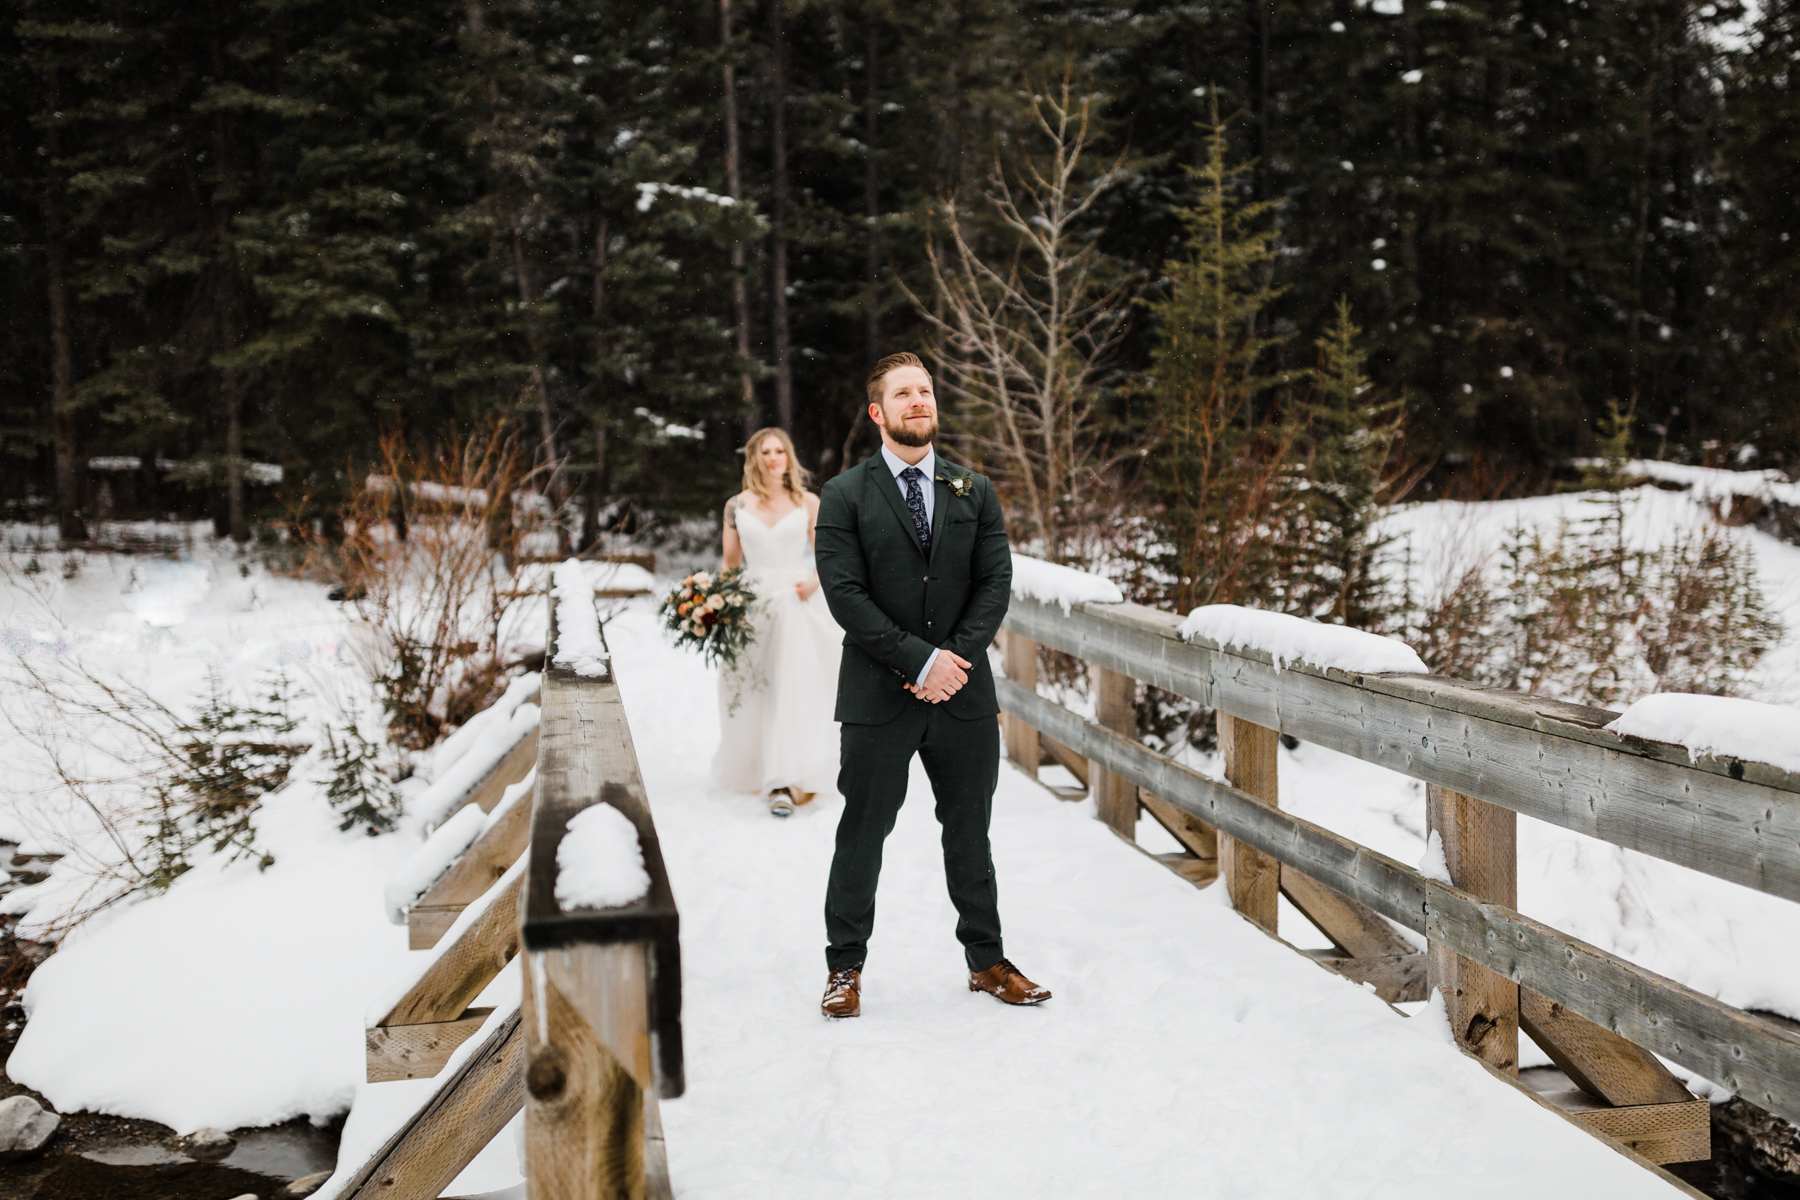 Canmore Elopement Photographer in the Canadian Rockies - Image 13